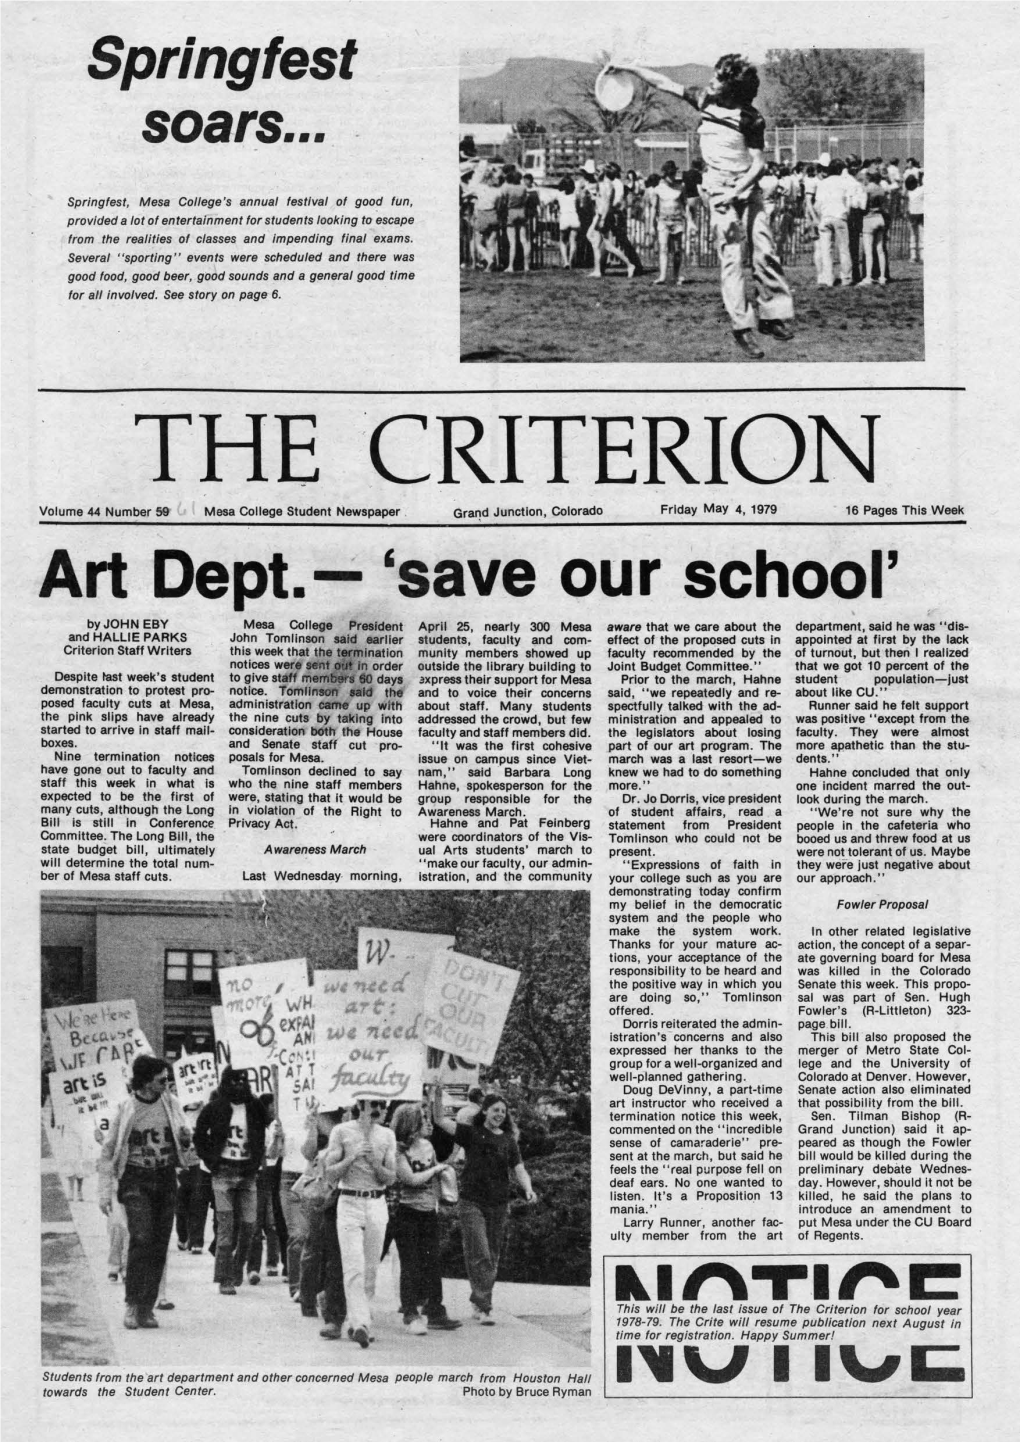 Art Dept. 'Save Our School' by JOHN EBY Mesa College President April 25, Nearly 300